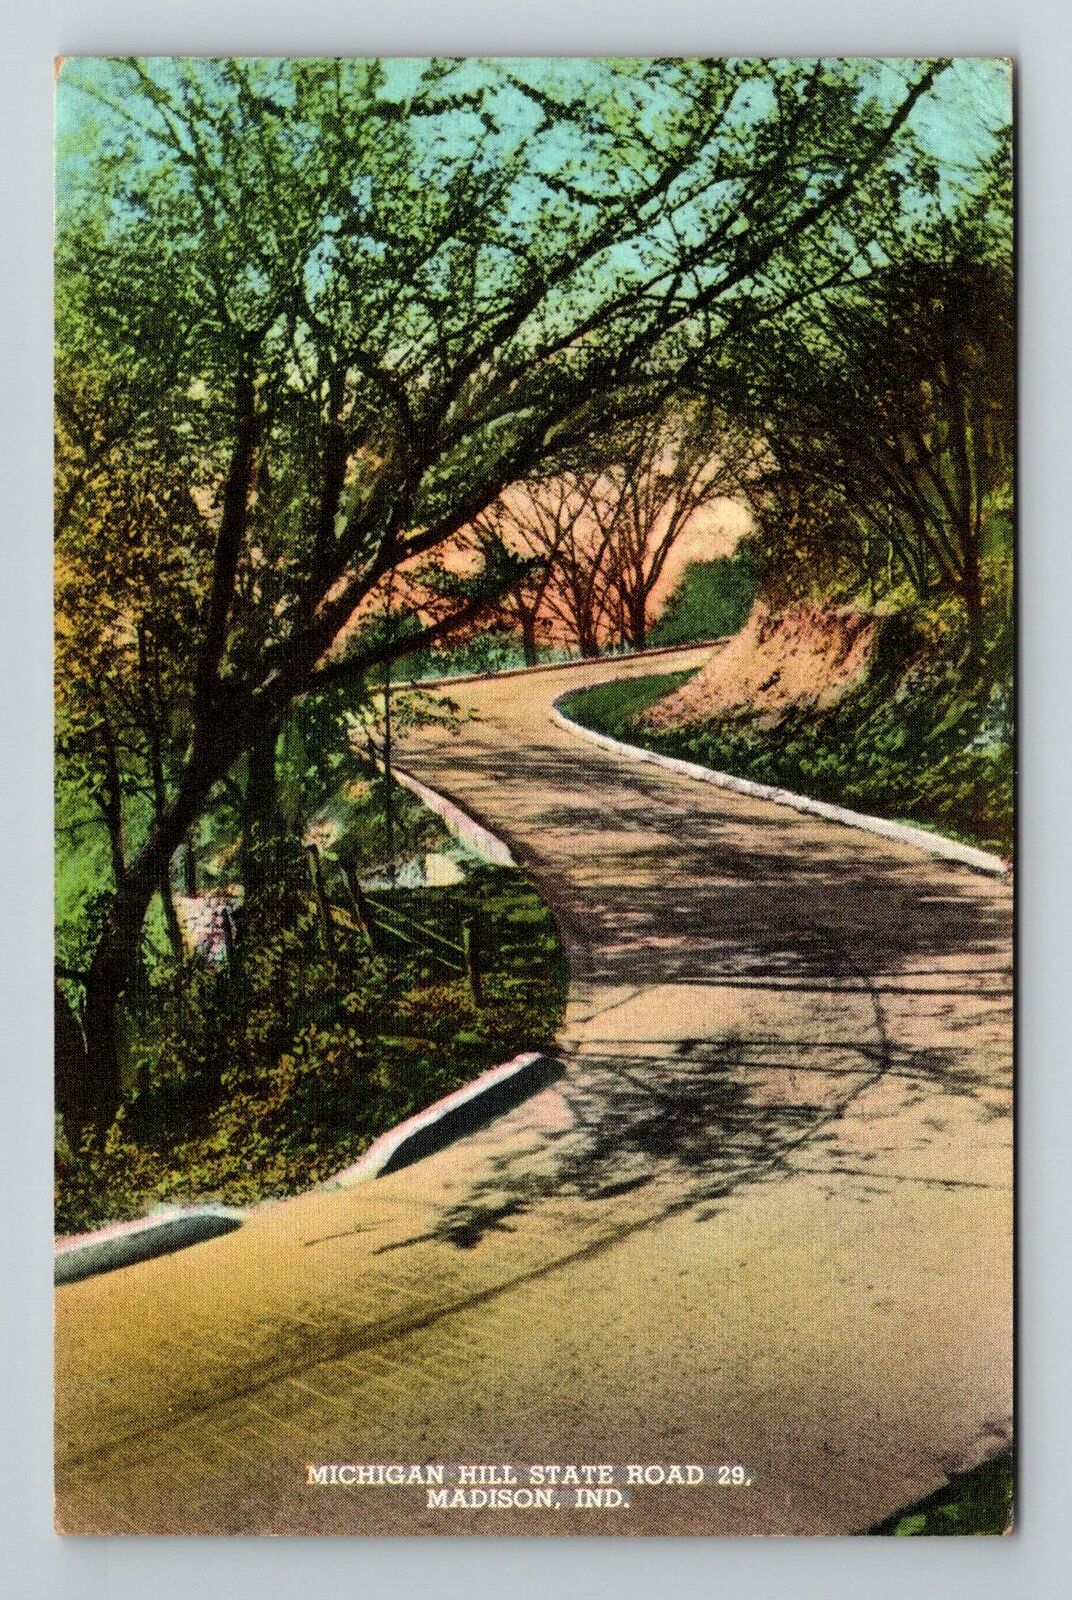 Madison, IN-Indiana, Michigan Hill State Road 29 Antique c1946, Vintage Postcard